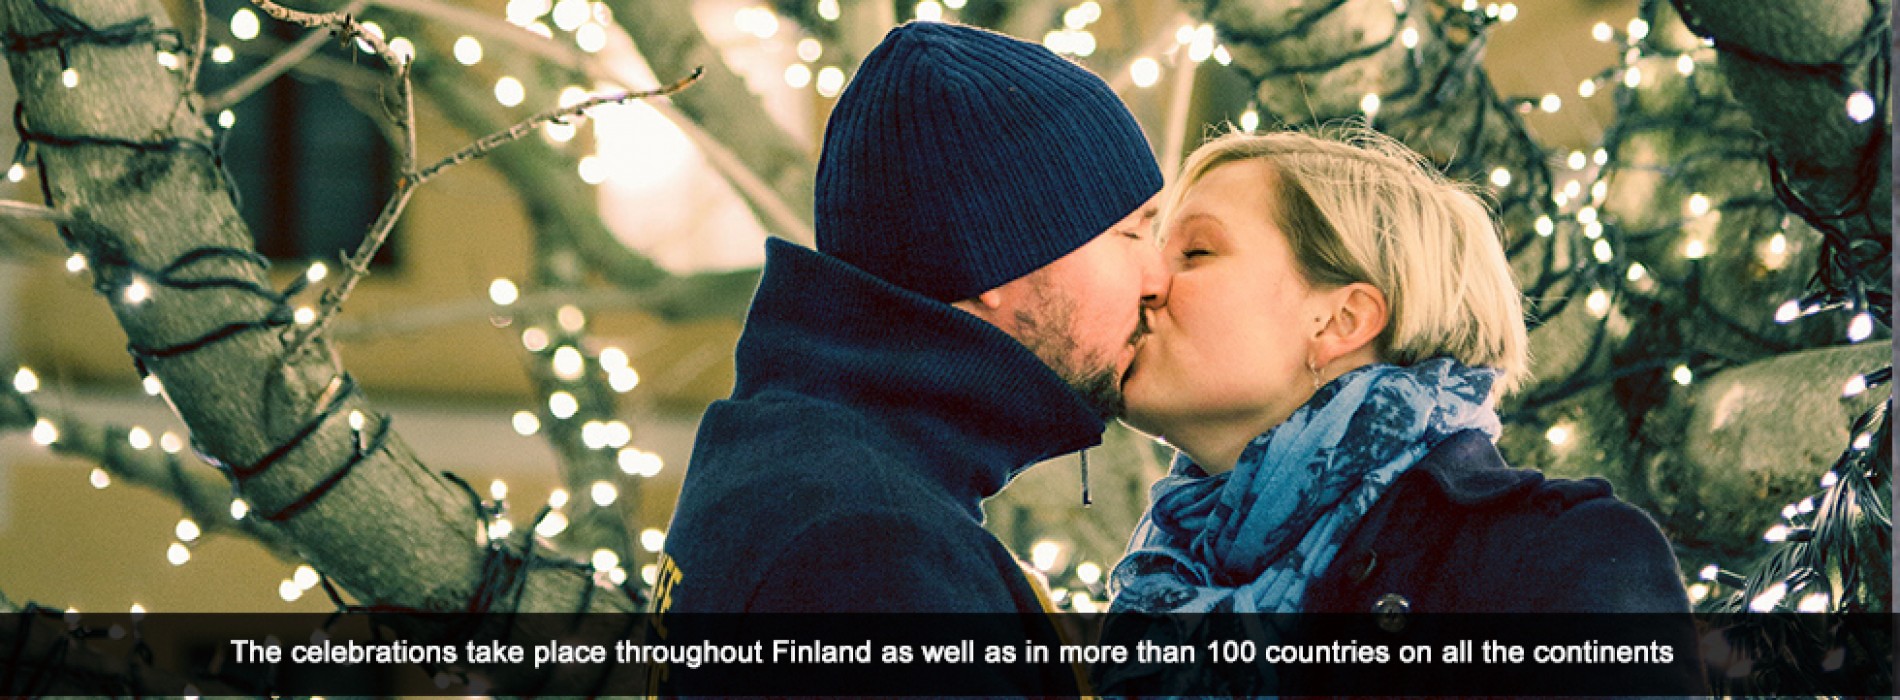 Finland’s centenary of independence is being celebrated in an epic way throughout the world